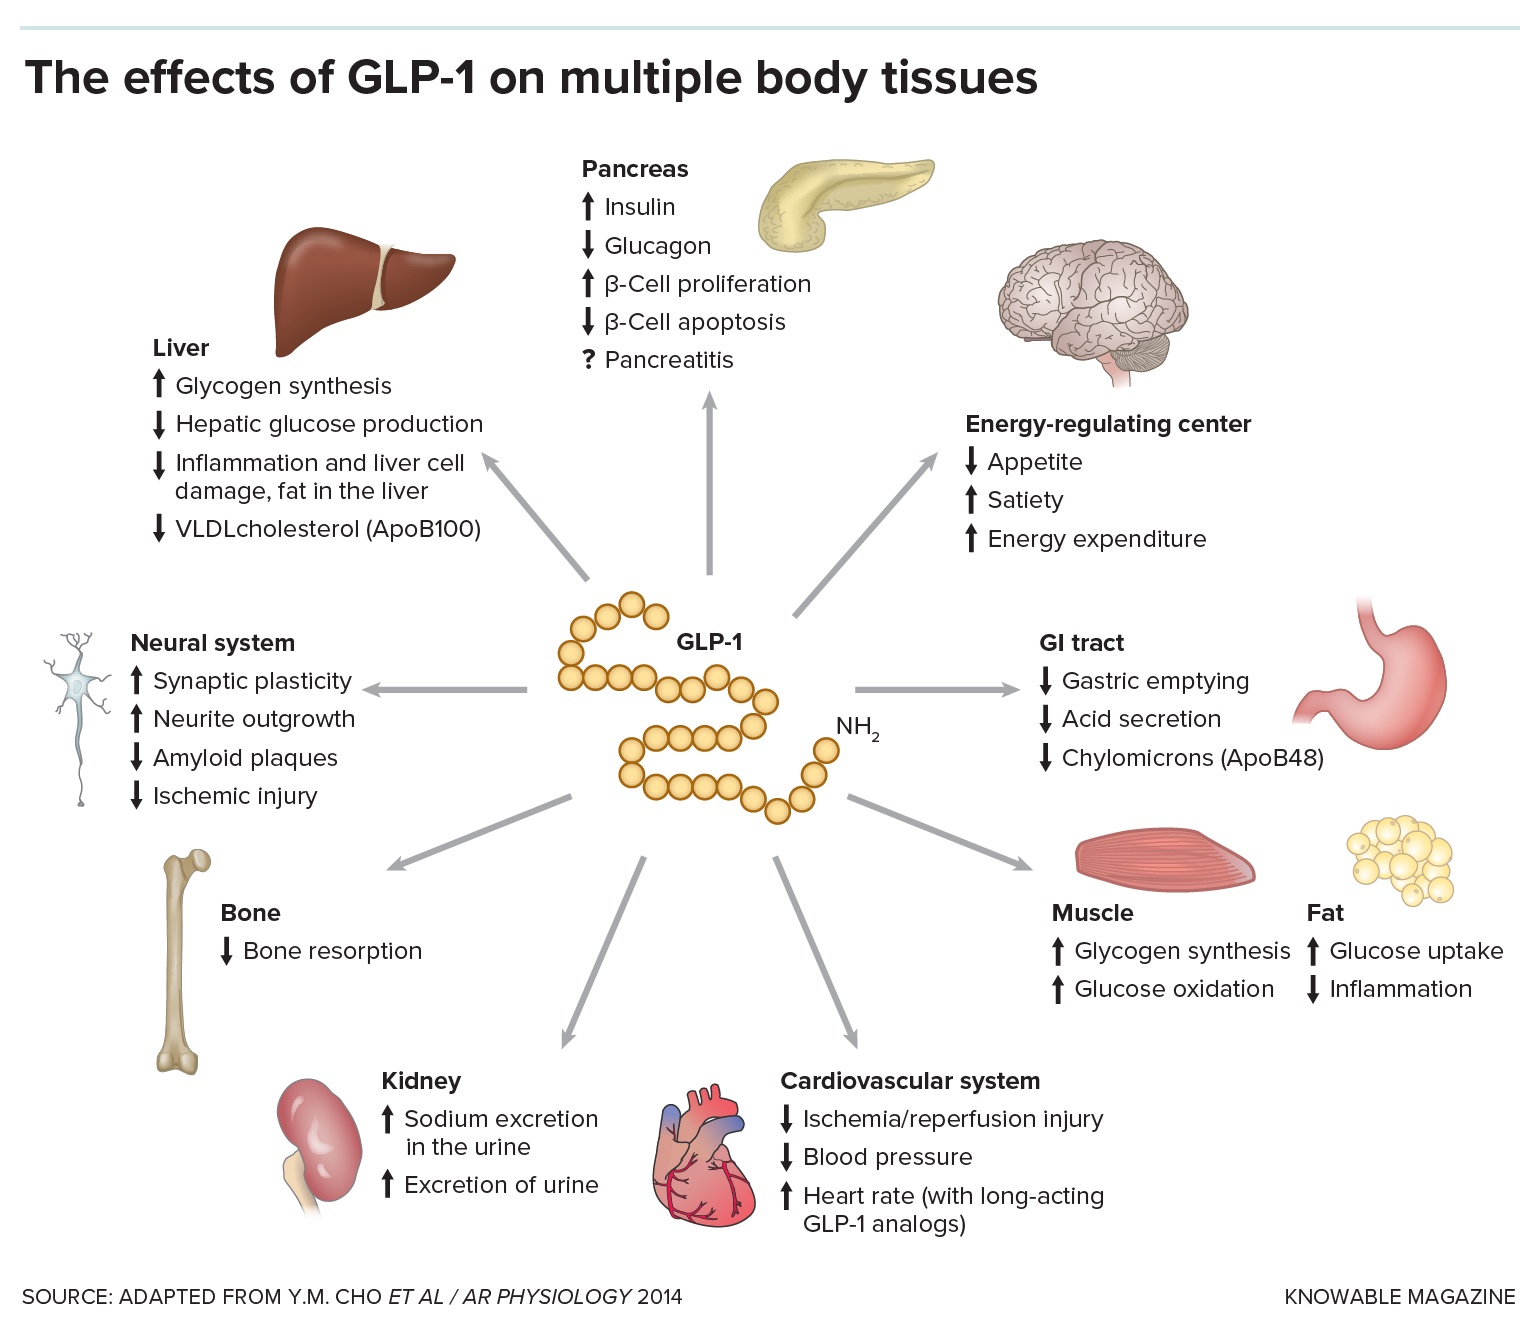 Illustration depicting the effects of GLP-1 on various human body tissues, including liver, pancreas, brain, and heart, highlighting both positive and negative impacts.